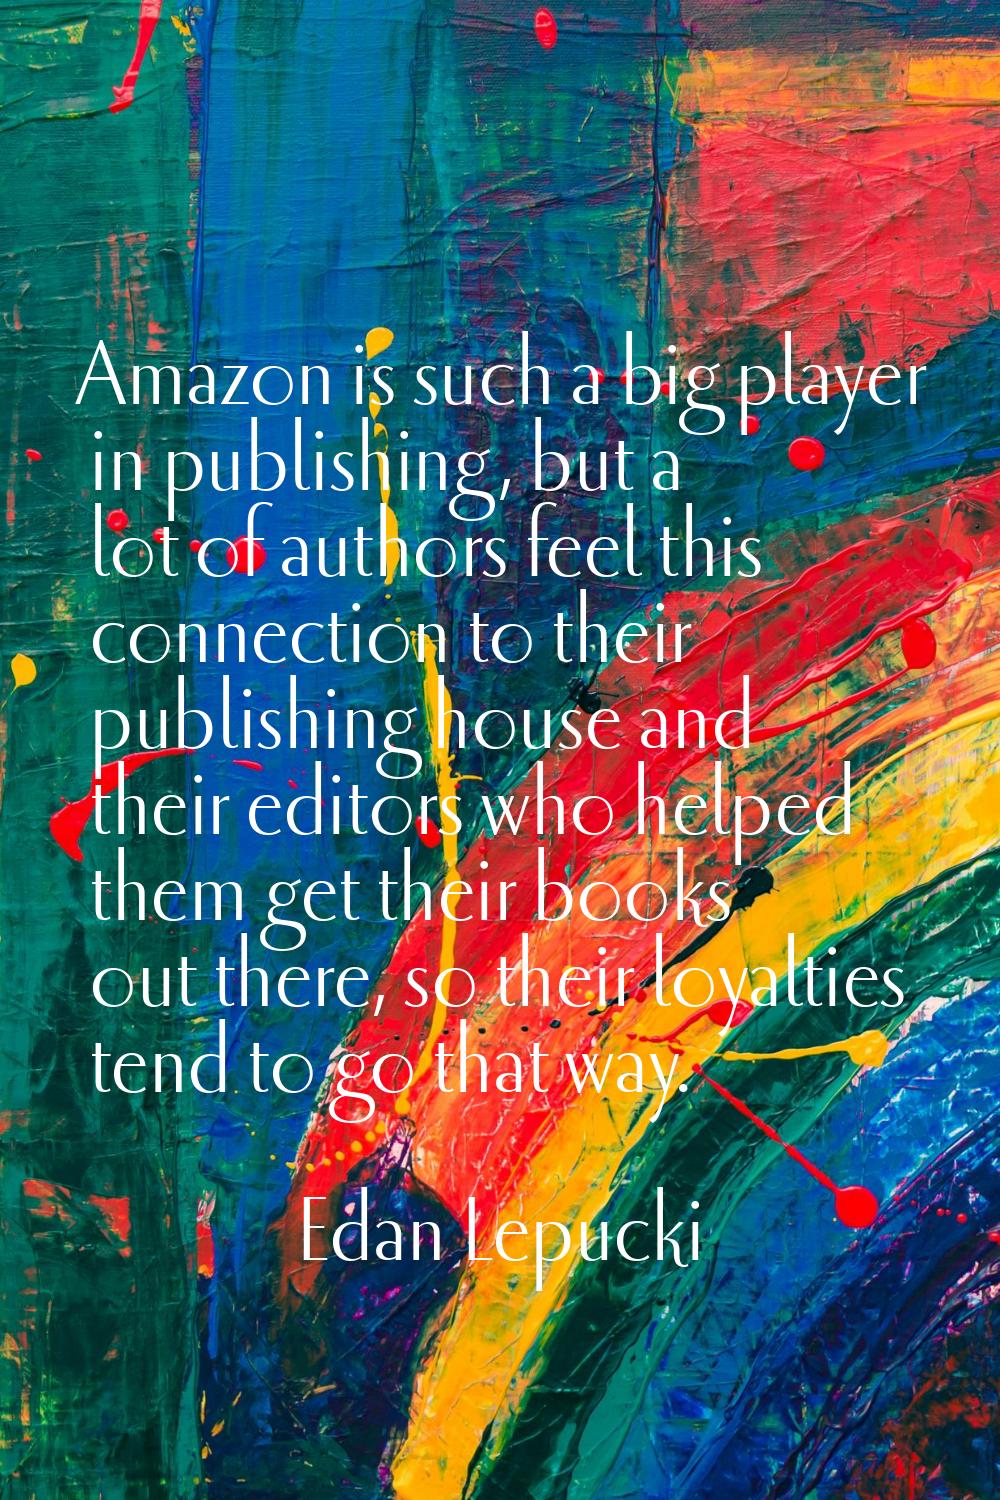 Amazon is such a big player in publishing, but a lot of authors feel this connection to their publi